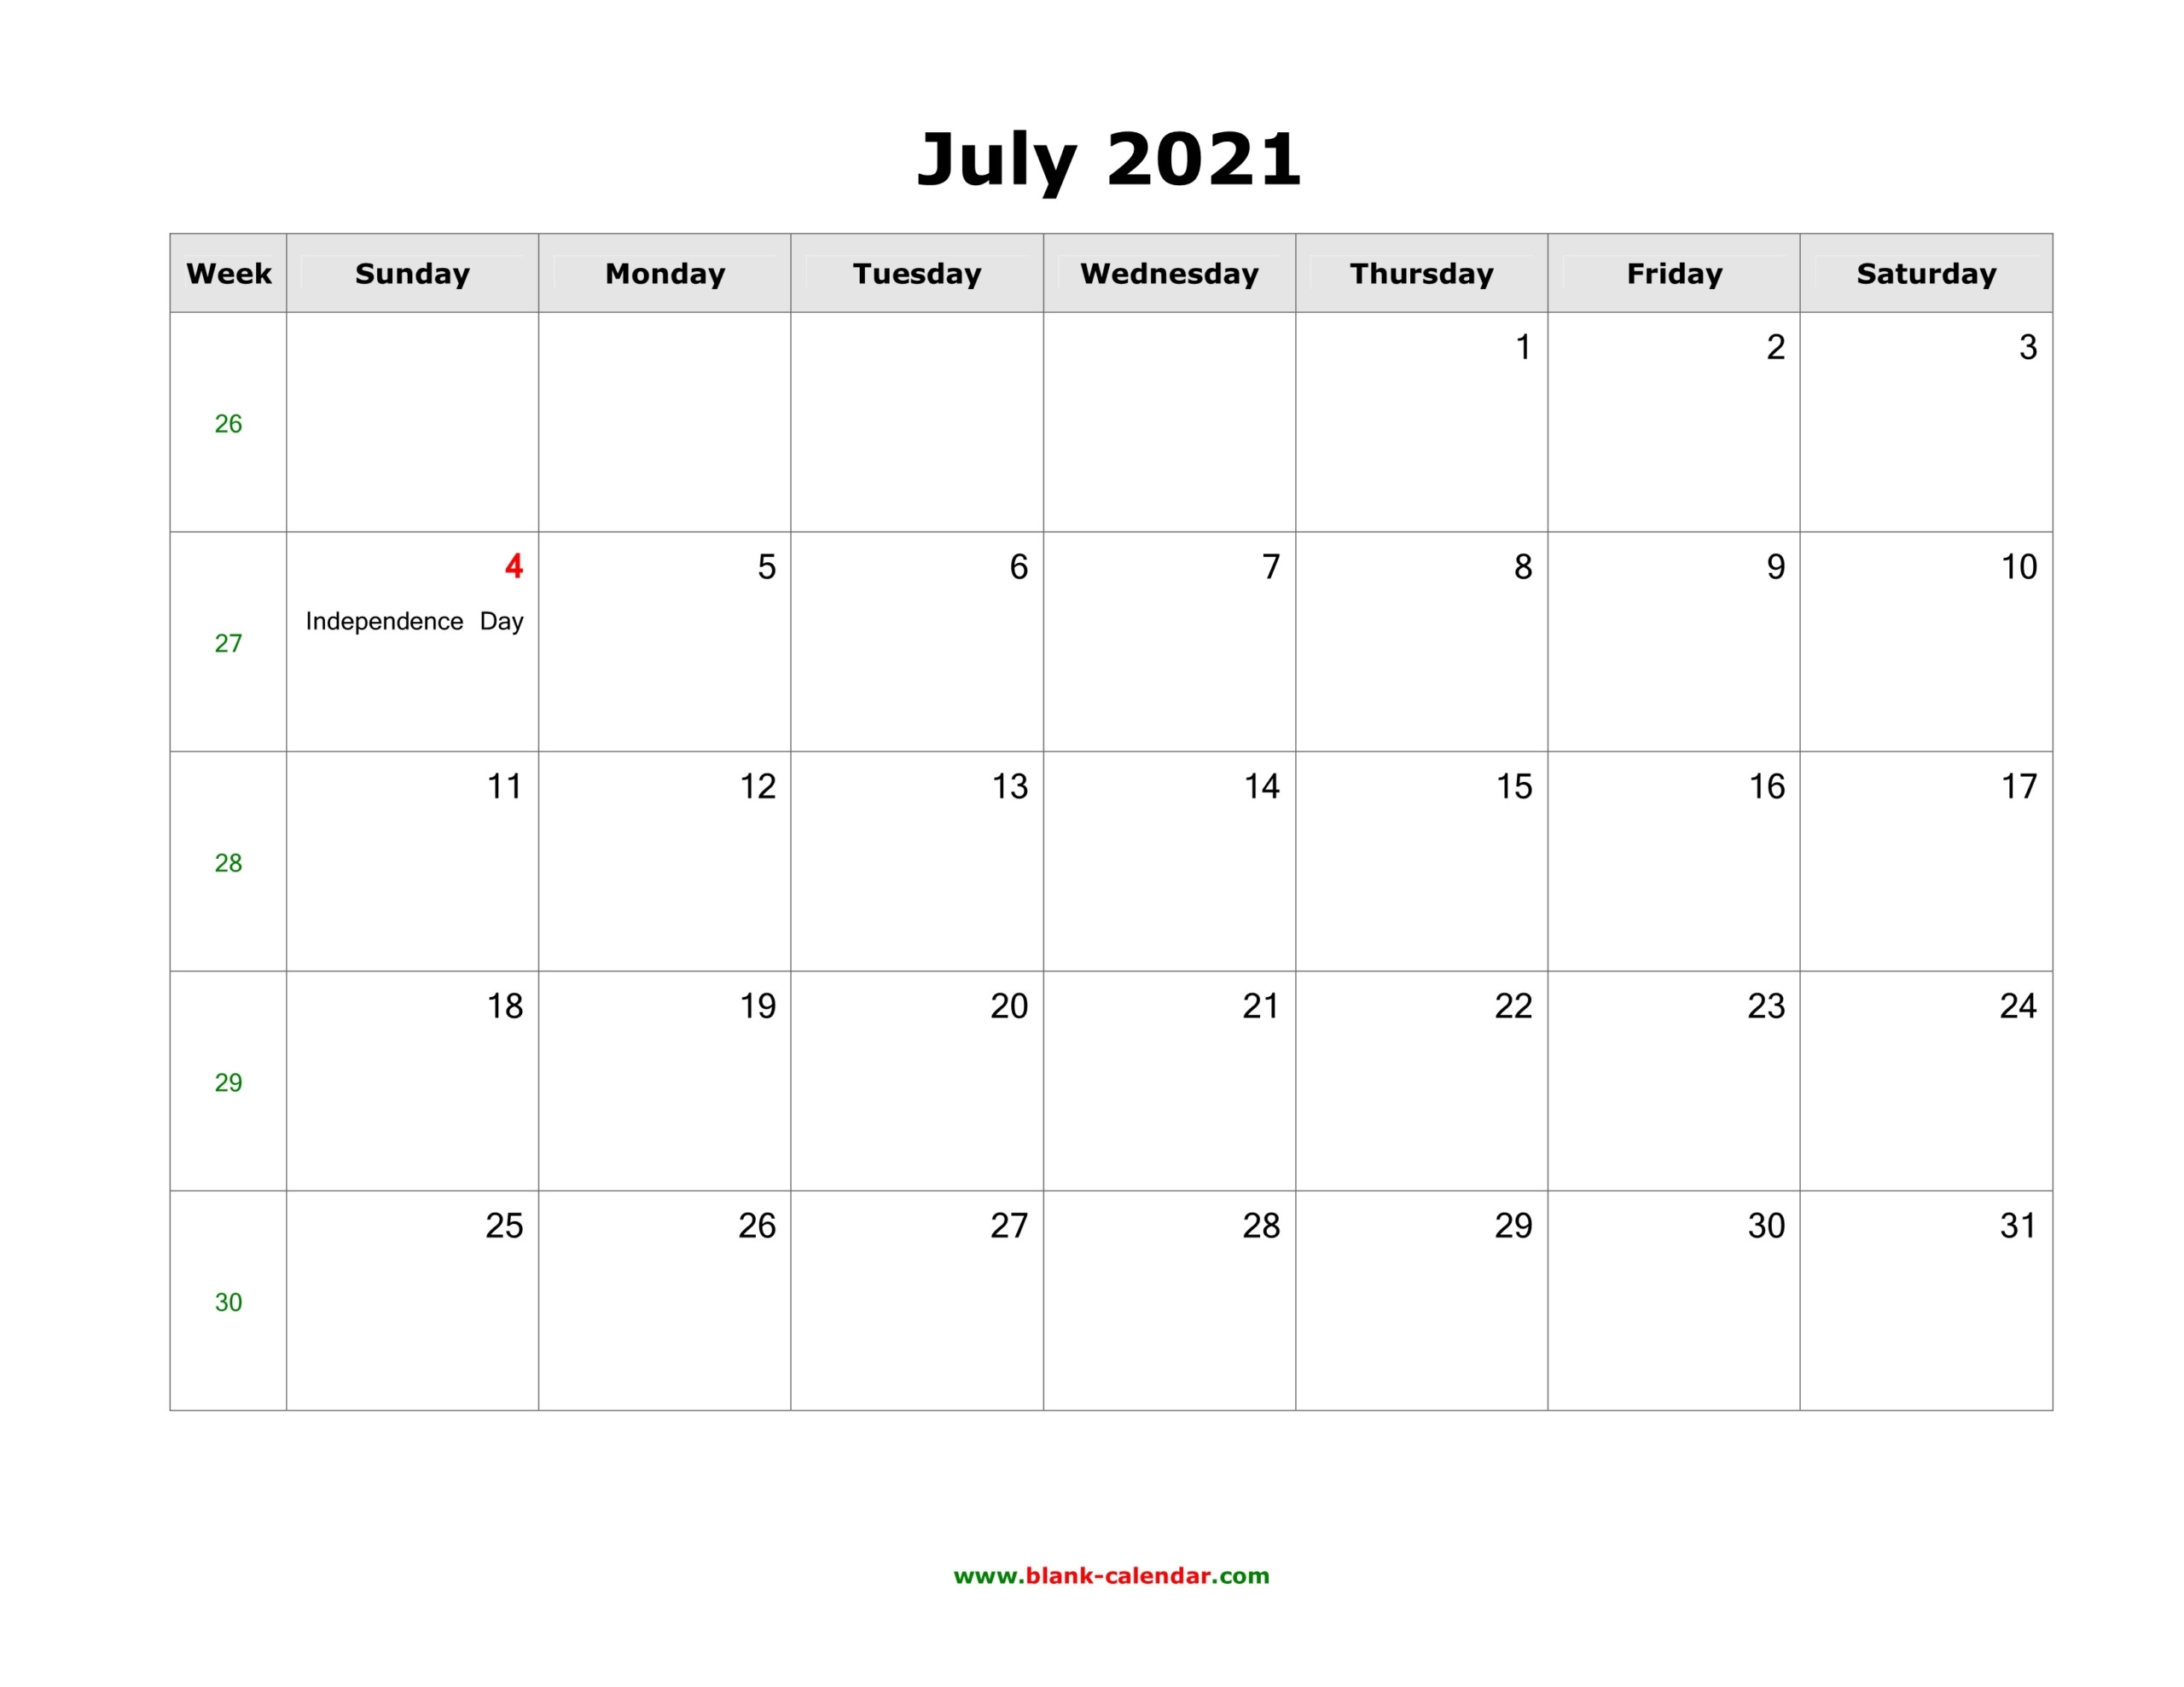 Get Print Free July 2021 Calendar Without Downloading